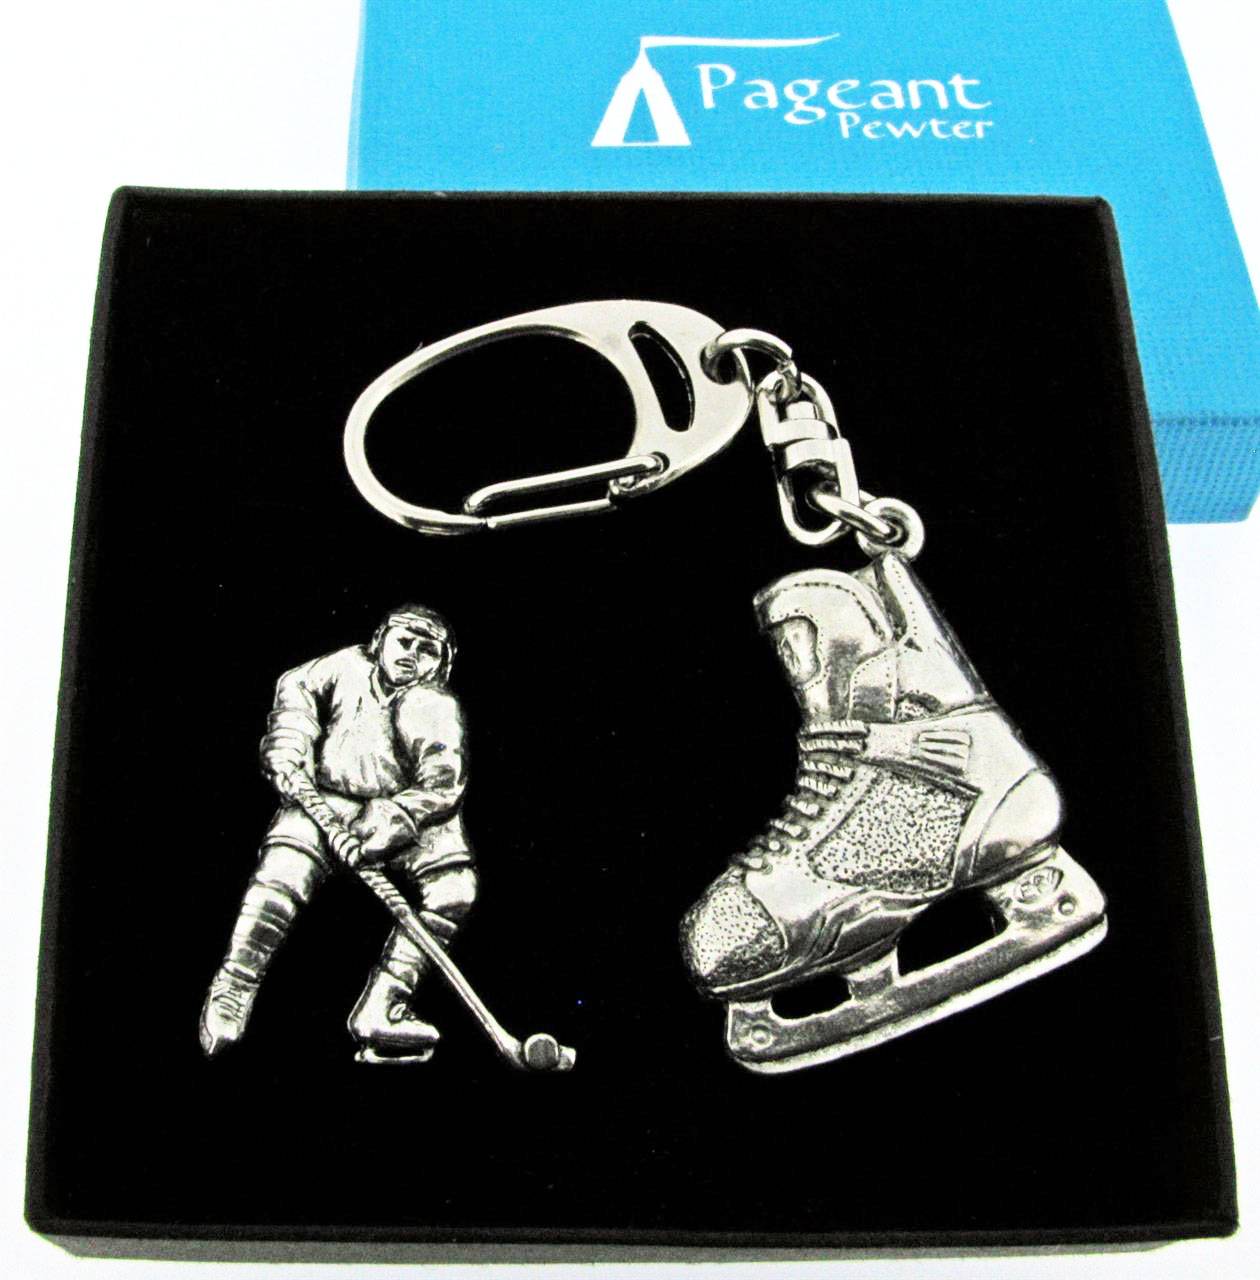 Ice Hockey Keyring Gift Set - high quality pewter gifts from Pageant Pewter